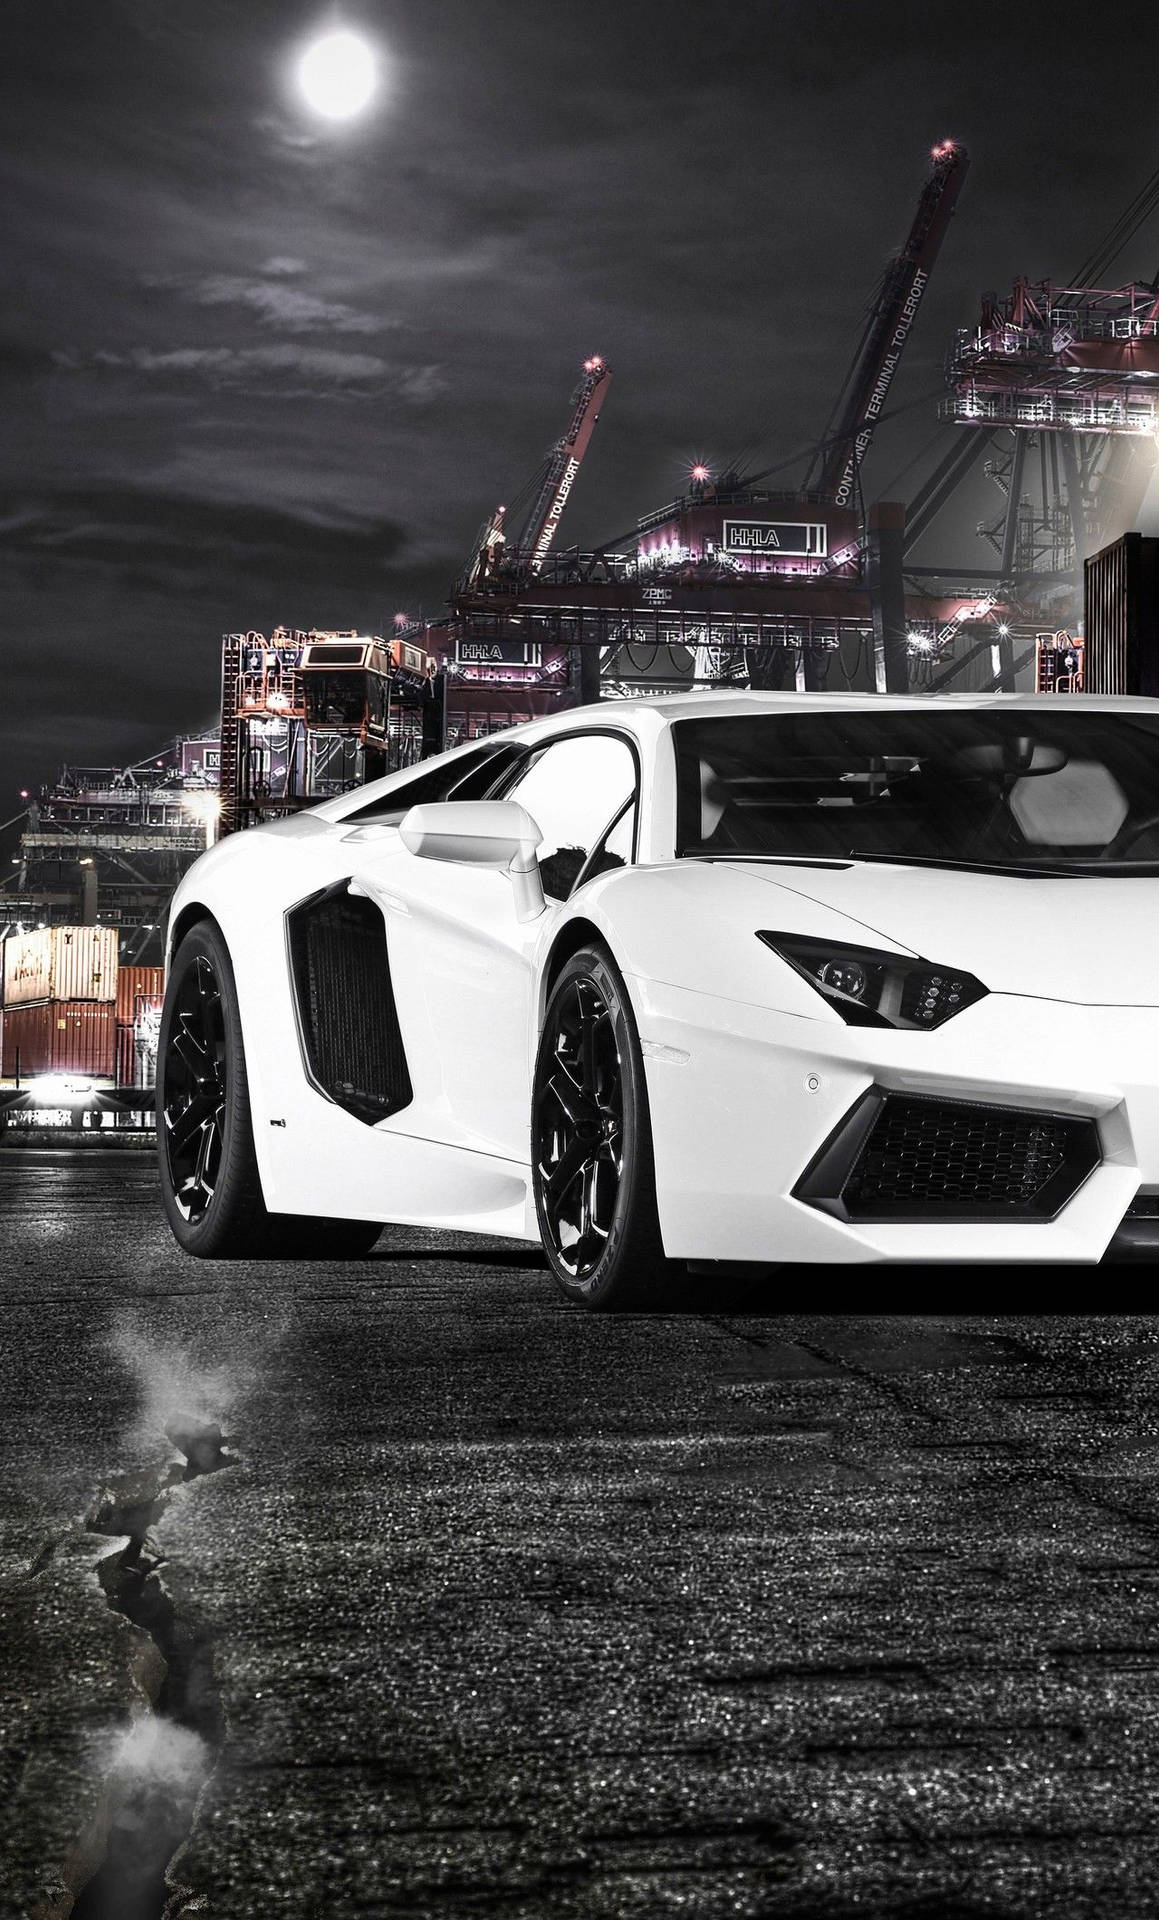 Luxurious Lifestyle - White Lamborghini Paired With An Iphone Background